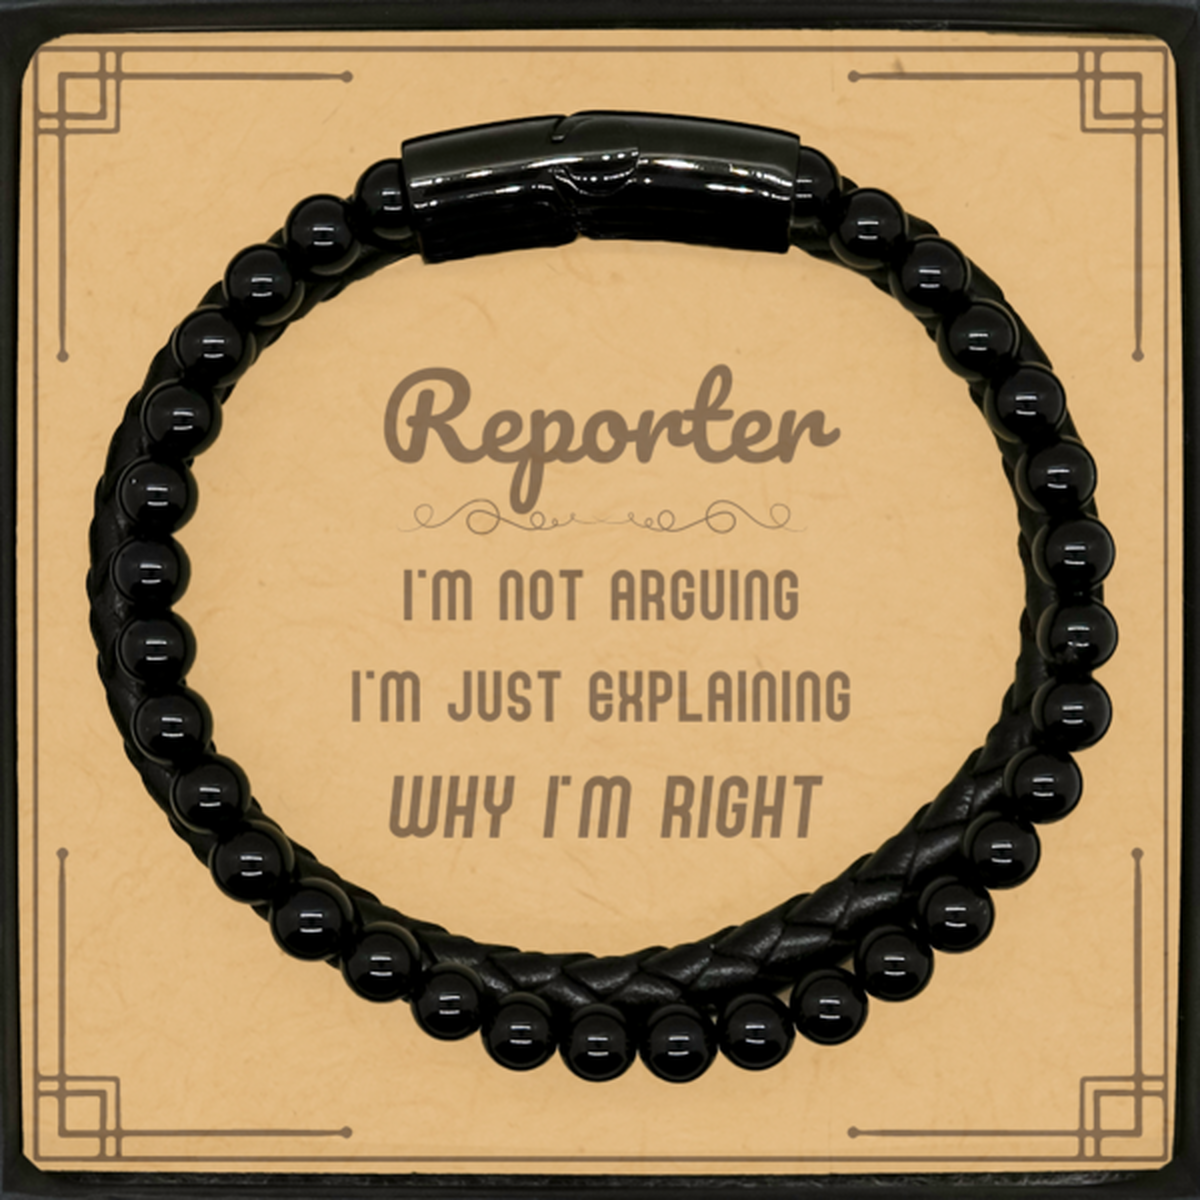 Reporter I'm not Arguing. I'm Just Explaining Why I'm RIGHT Stone Leather Bracelets, Funny Saying Quote Reporter Gifts For Reporter Message Card Graduation Birthday Christmas Gifts for Men Women Coworker